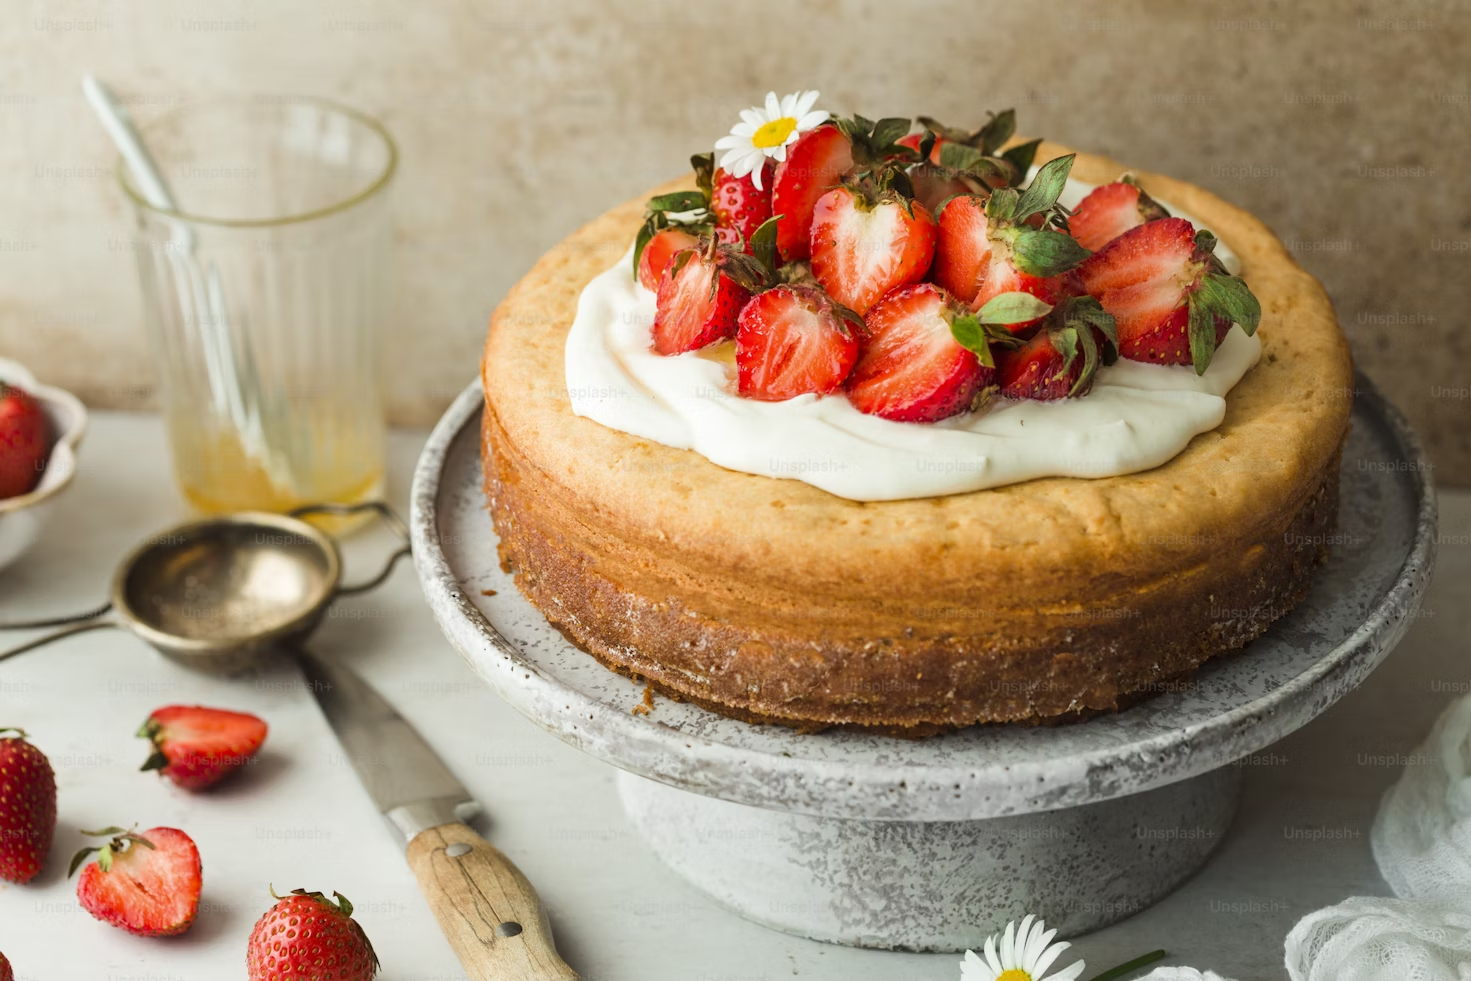 Bake the Heat Away: 10 Refreshing and flavorful Summer Cake Ideas